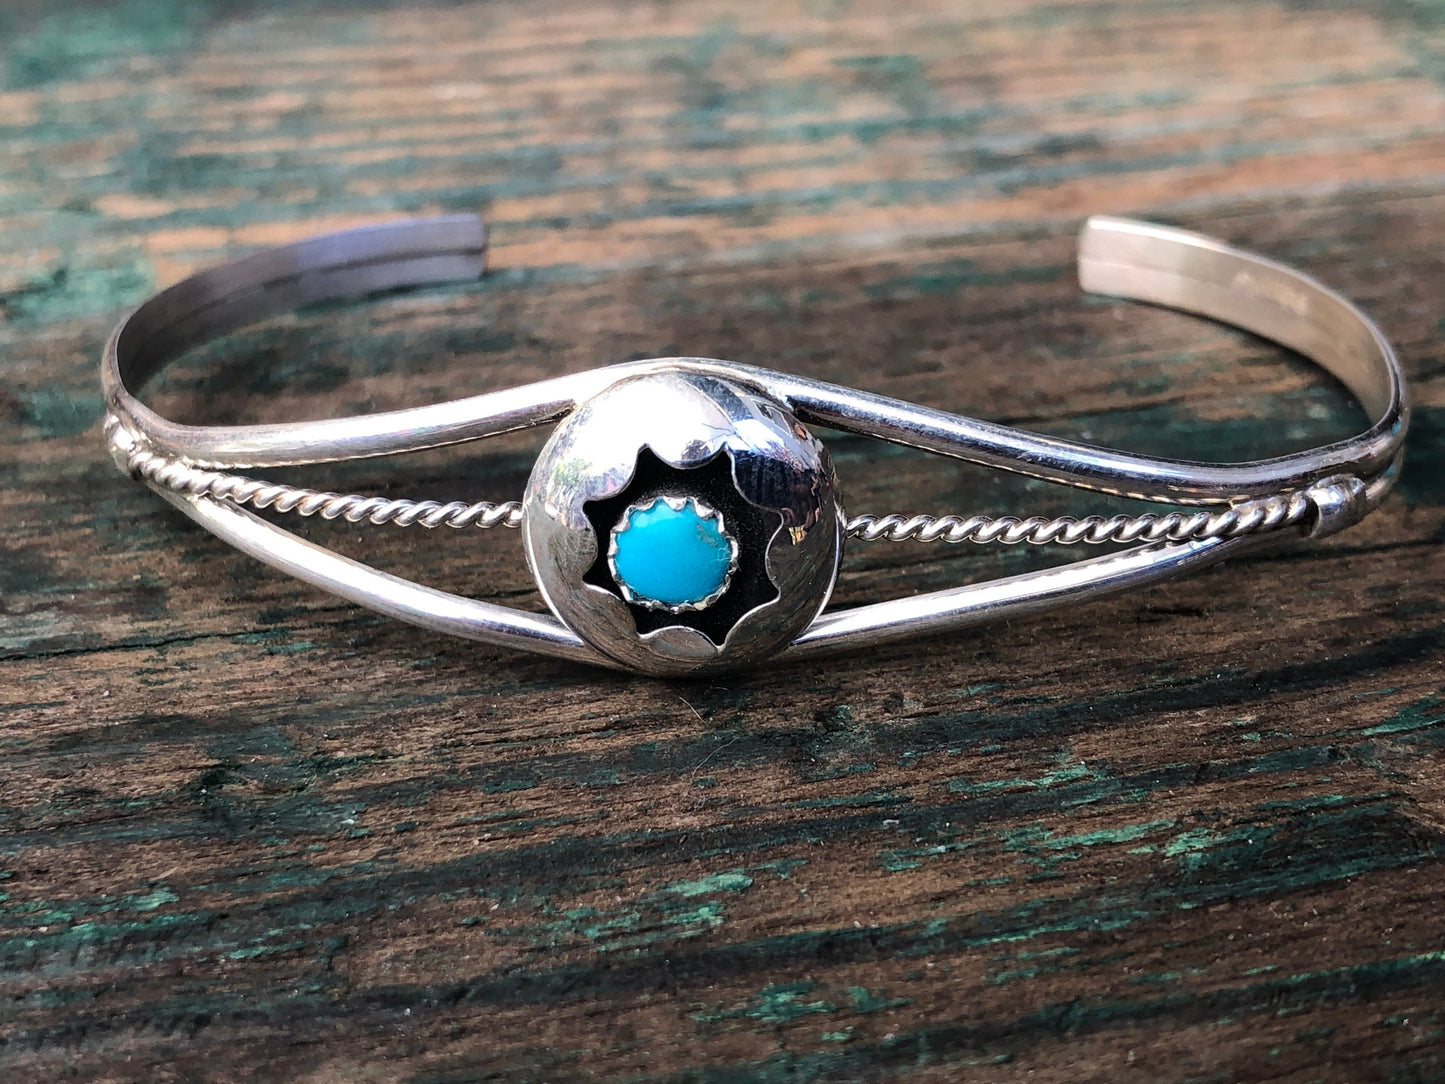 Native American Domed Shadowbox Turquoise Sterling Silver Cuff Bracelet